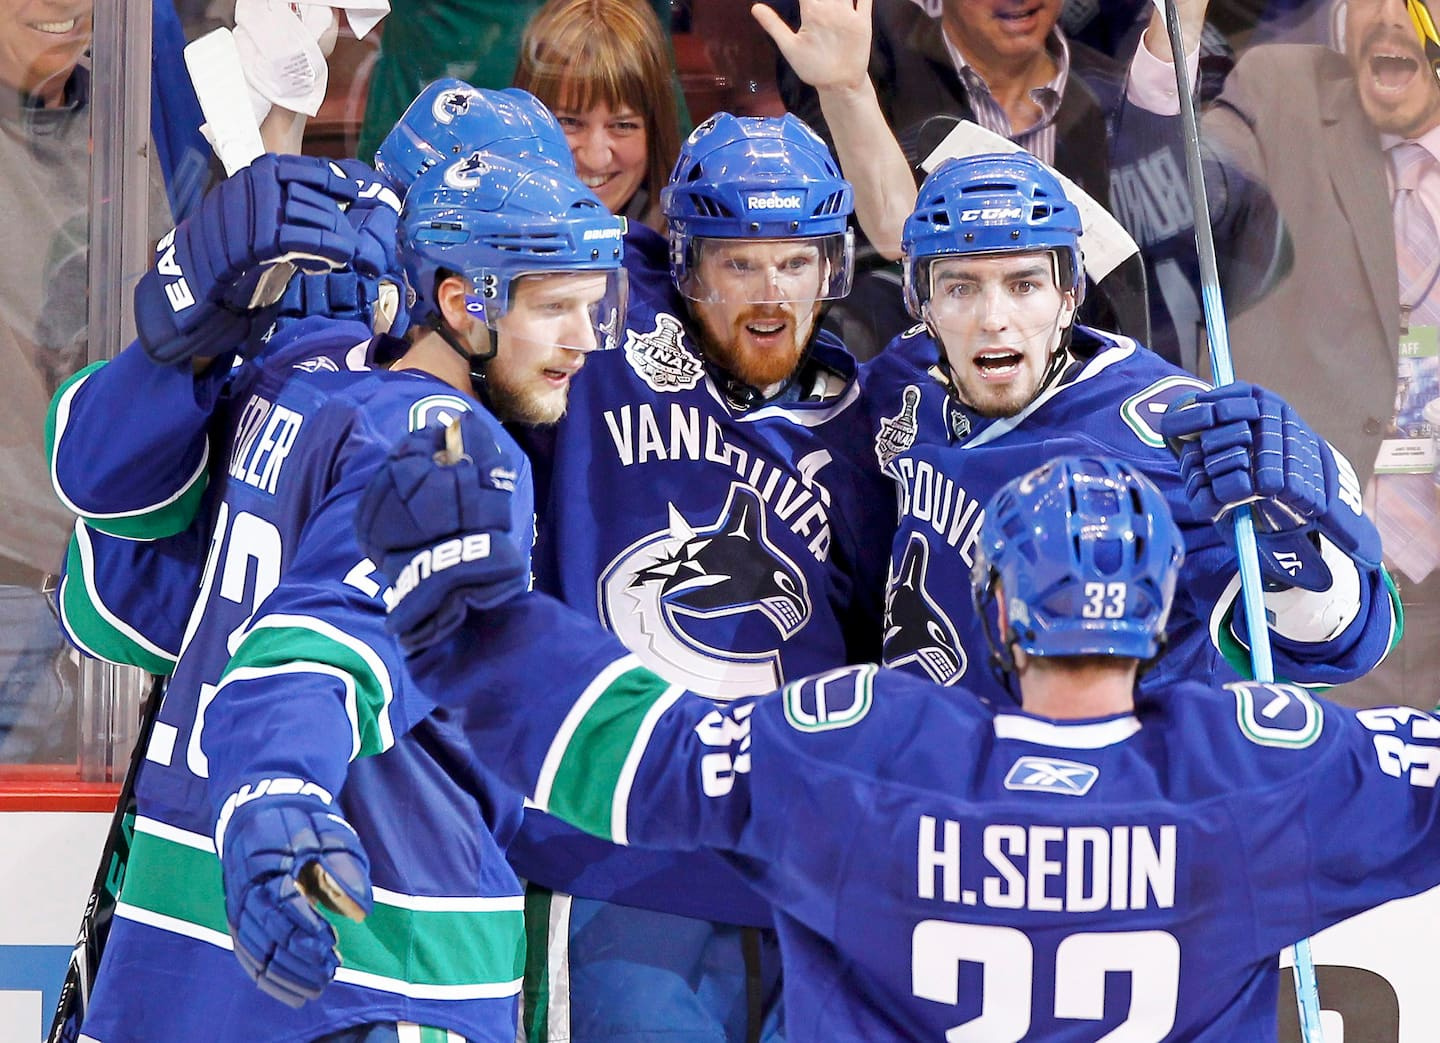 The “third Sedin” is very proud of their enthronement